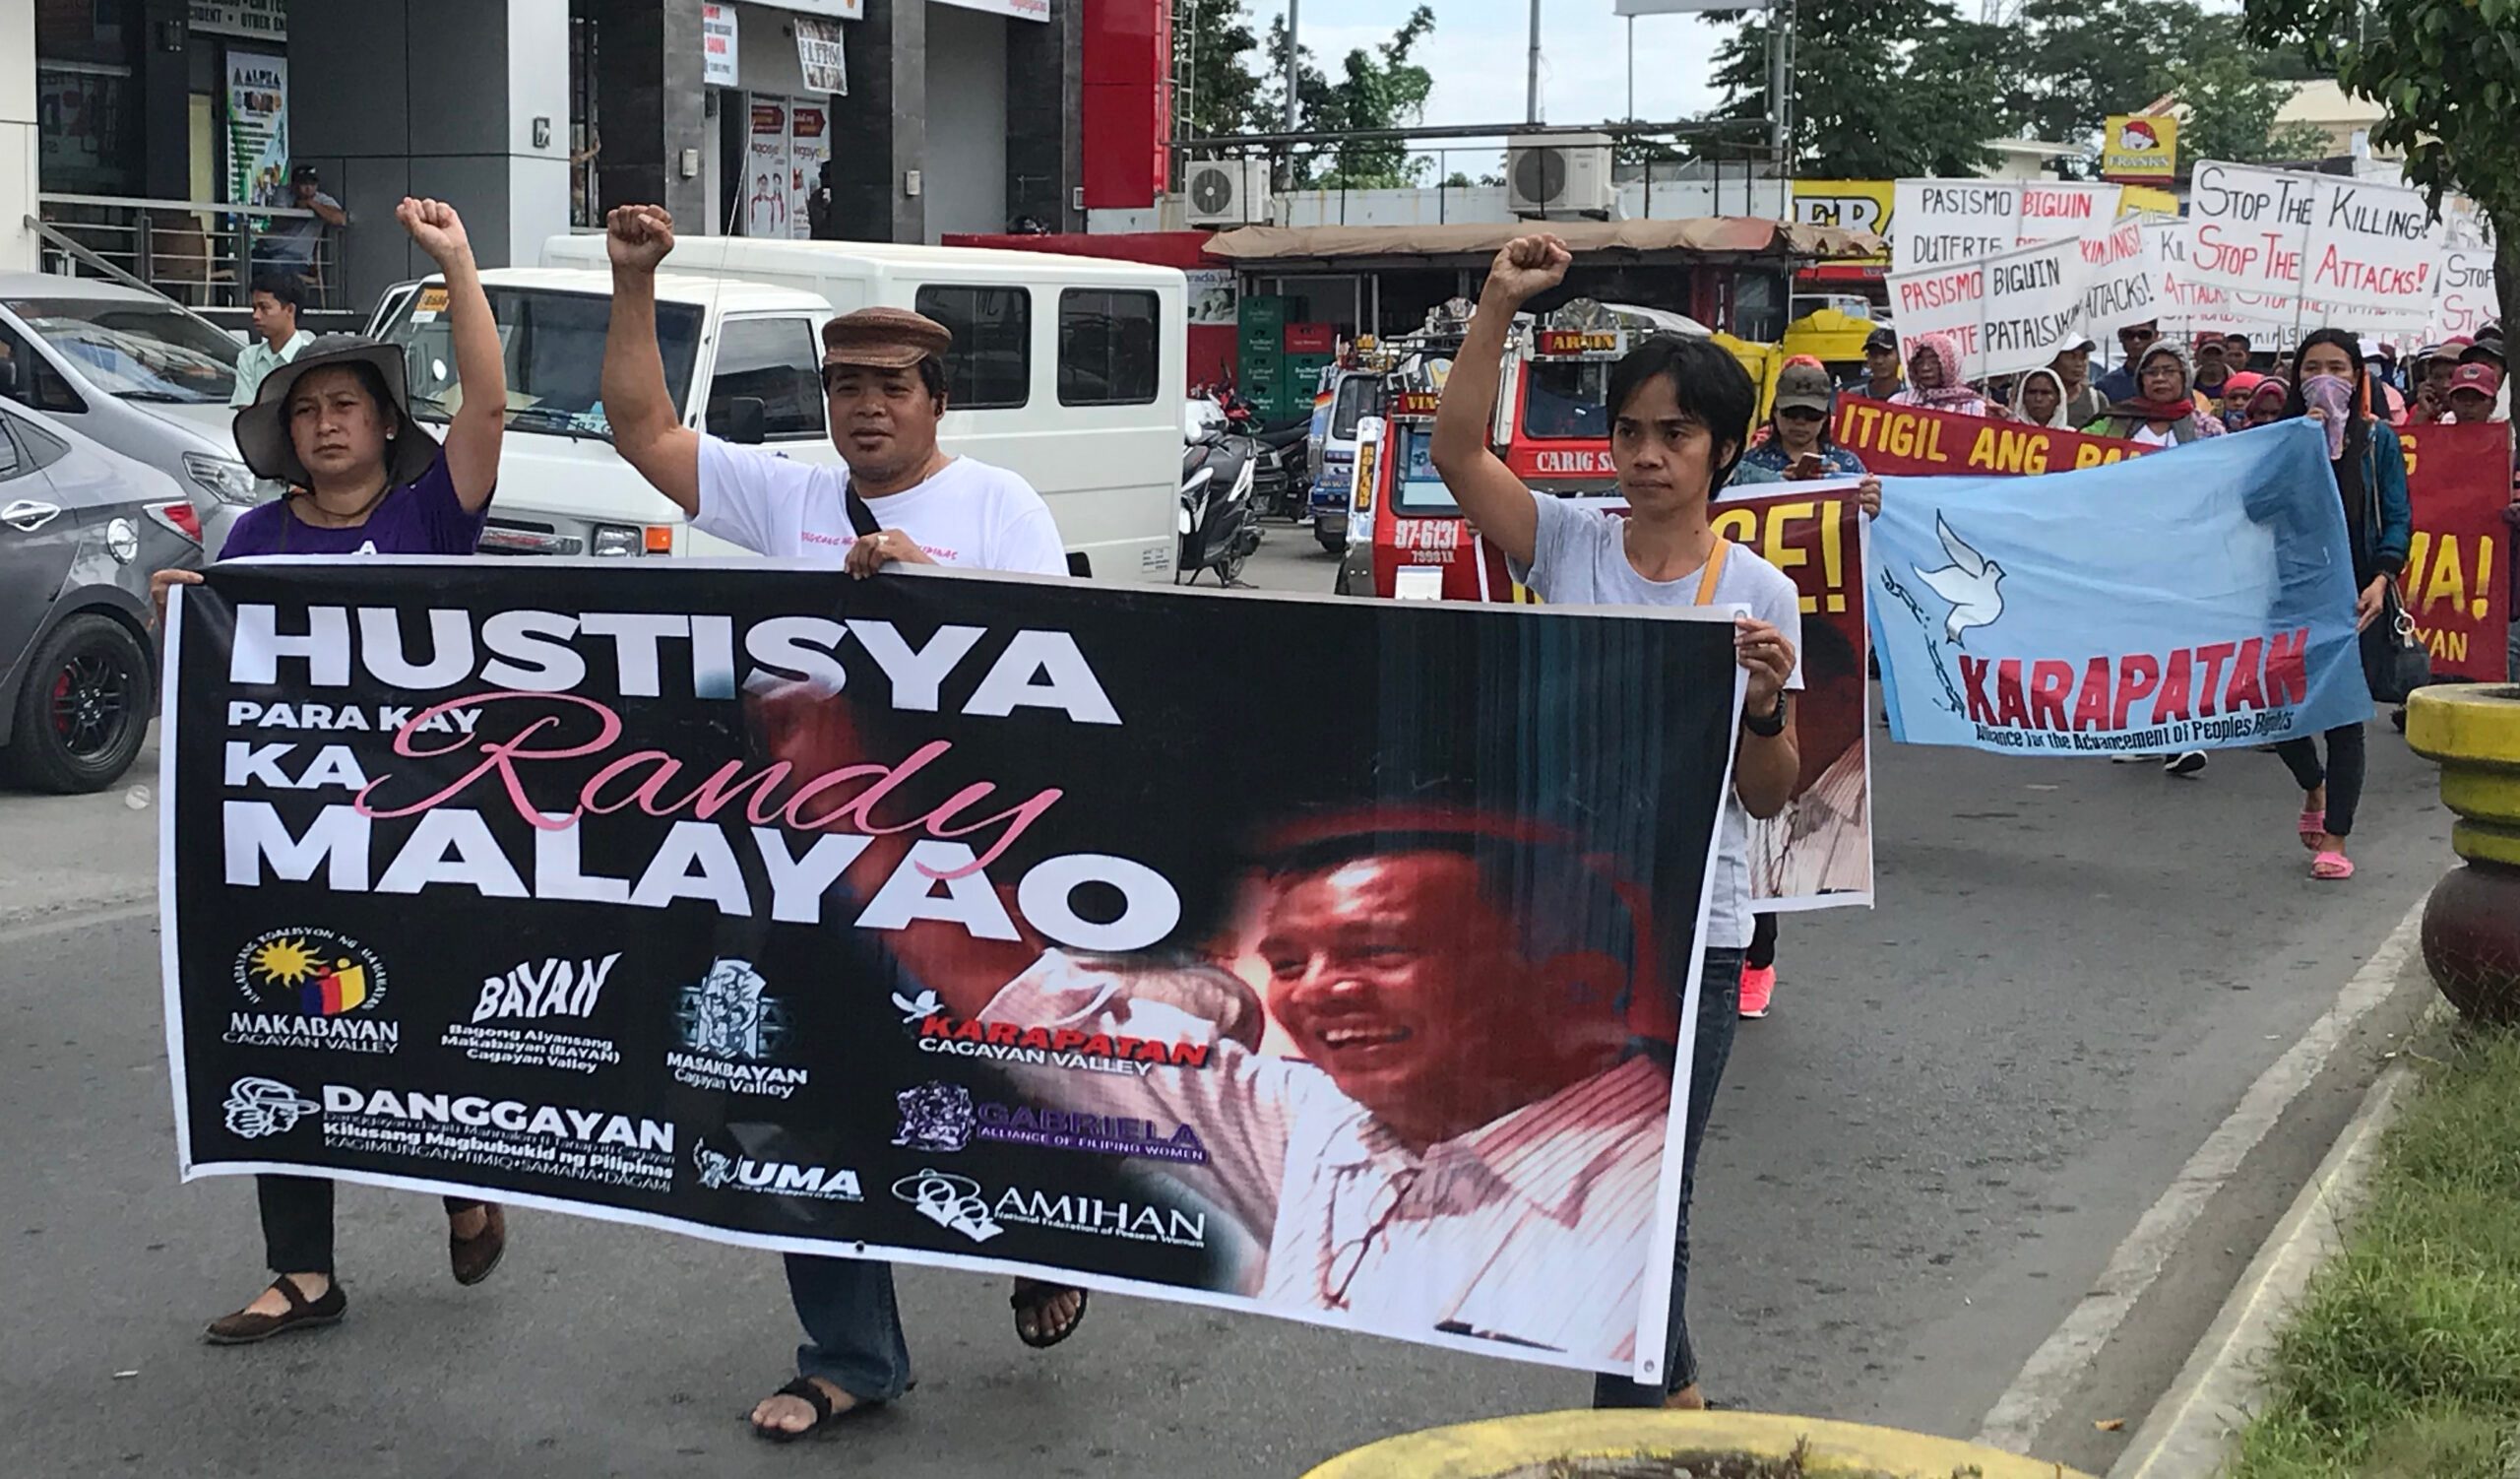 Groups in Cagayan march to call for justice for slain activist Malayao